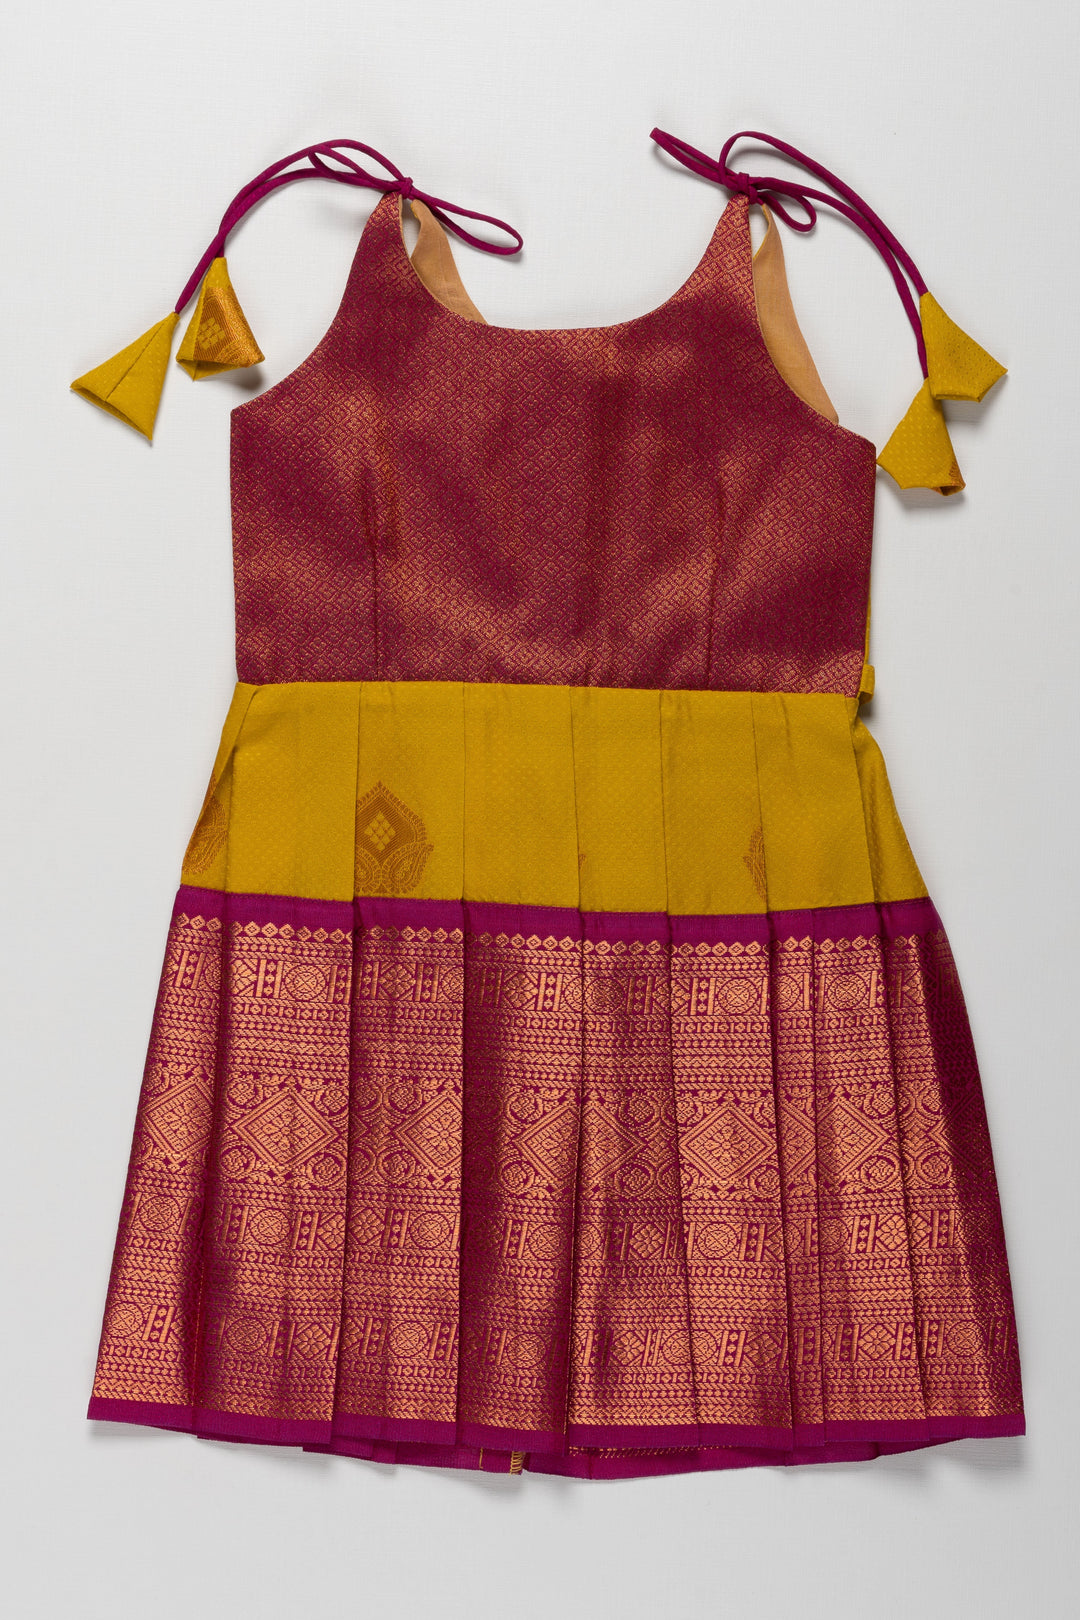 The Nesavu Tie-up Frock Radiant Silk Knot-Tie Frock for Namakarana and Karnavedha: Diverse and Bold Color Combinations Nesavu 14 (6M) / Yellow / Style 1 T379A-14 Stylish Maroon and Gold Silk Dresses for Kids | Unique Party Wear with Adjustable Ties | The Nesavu